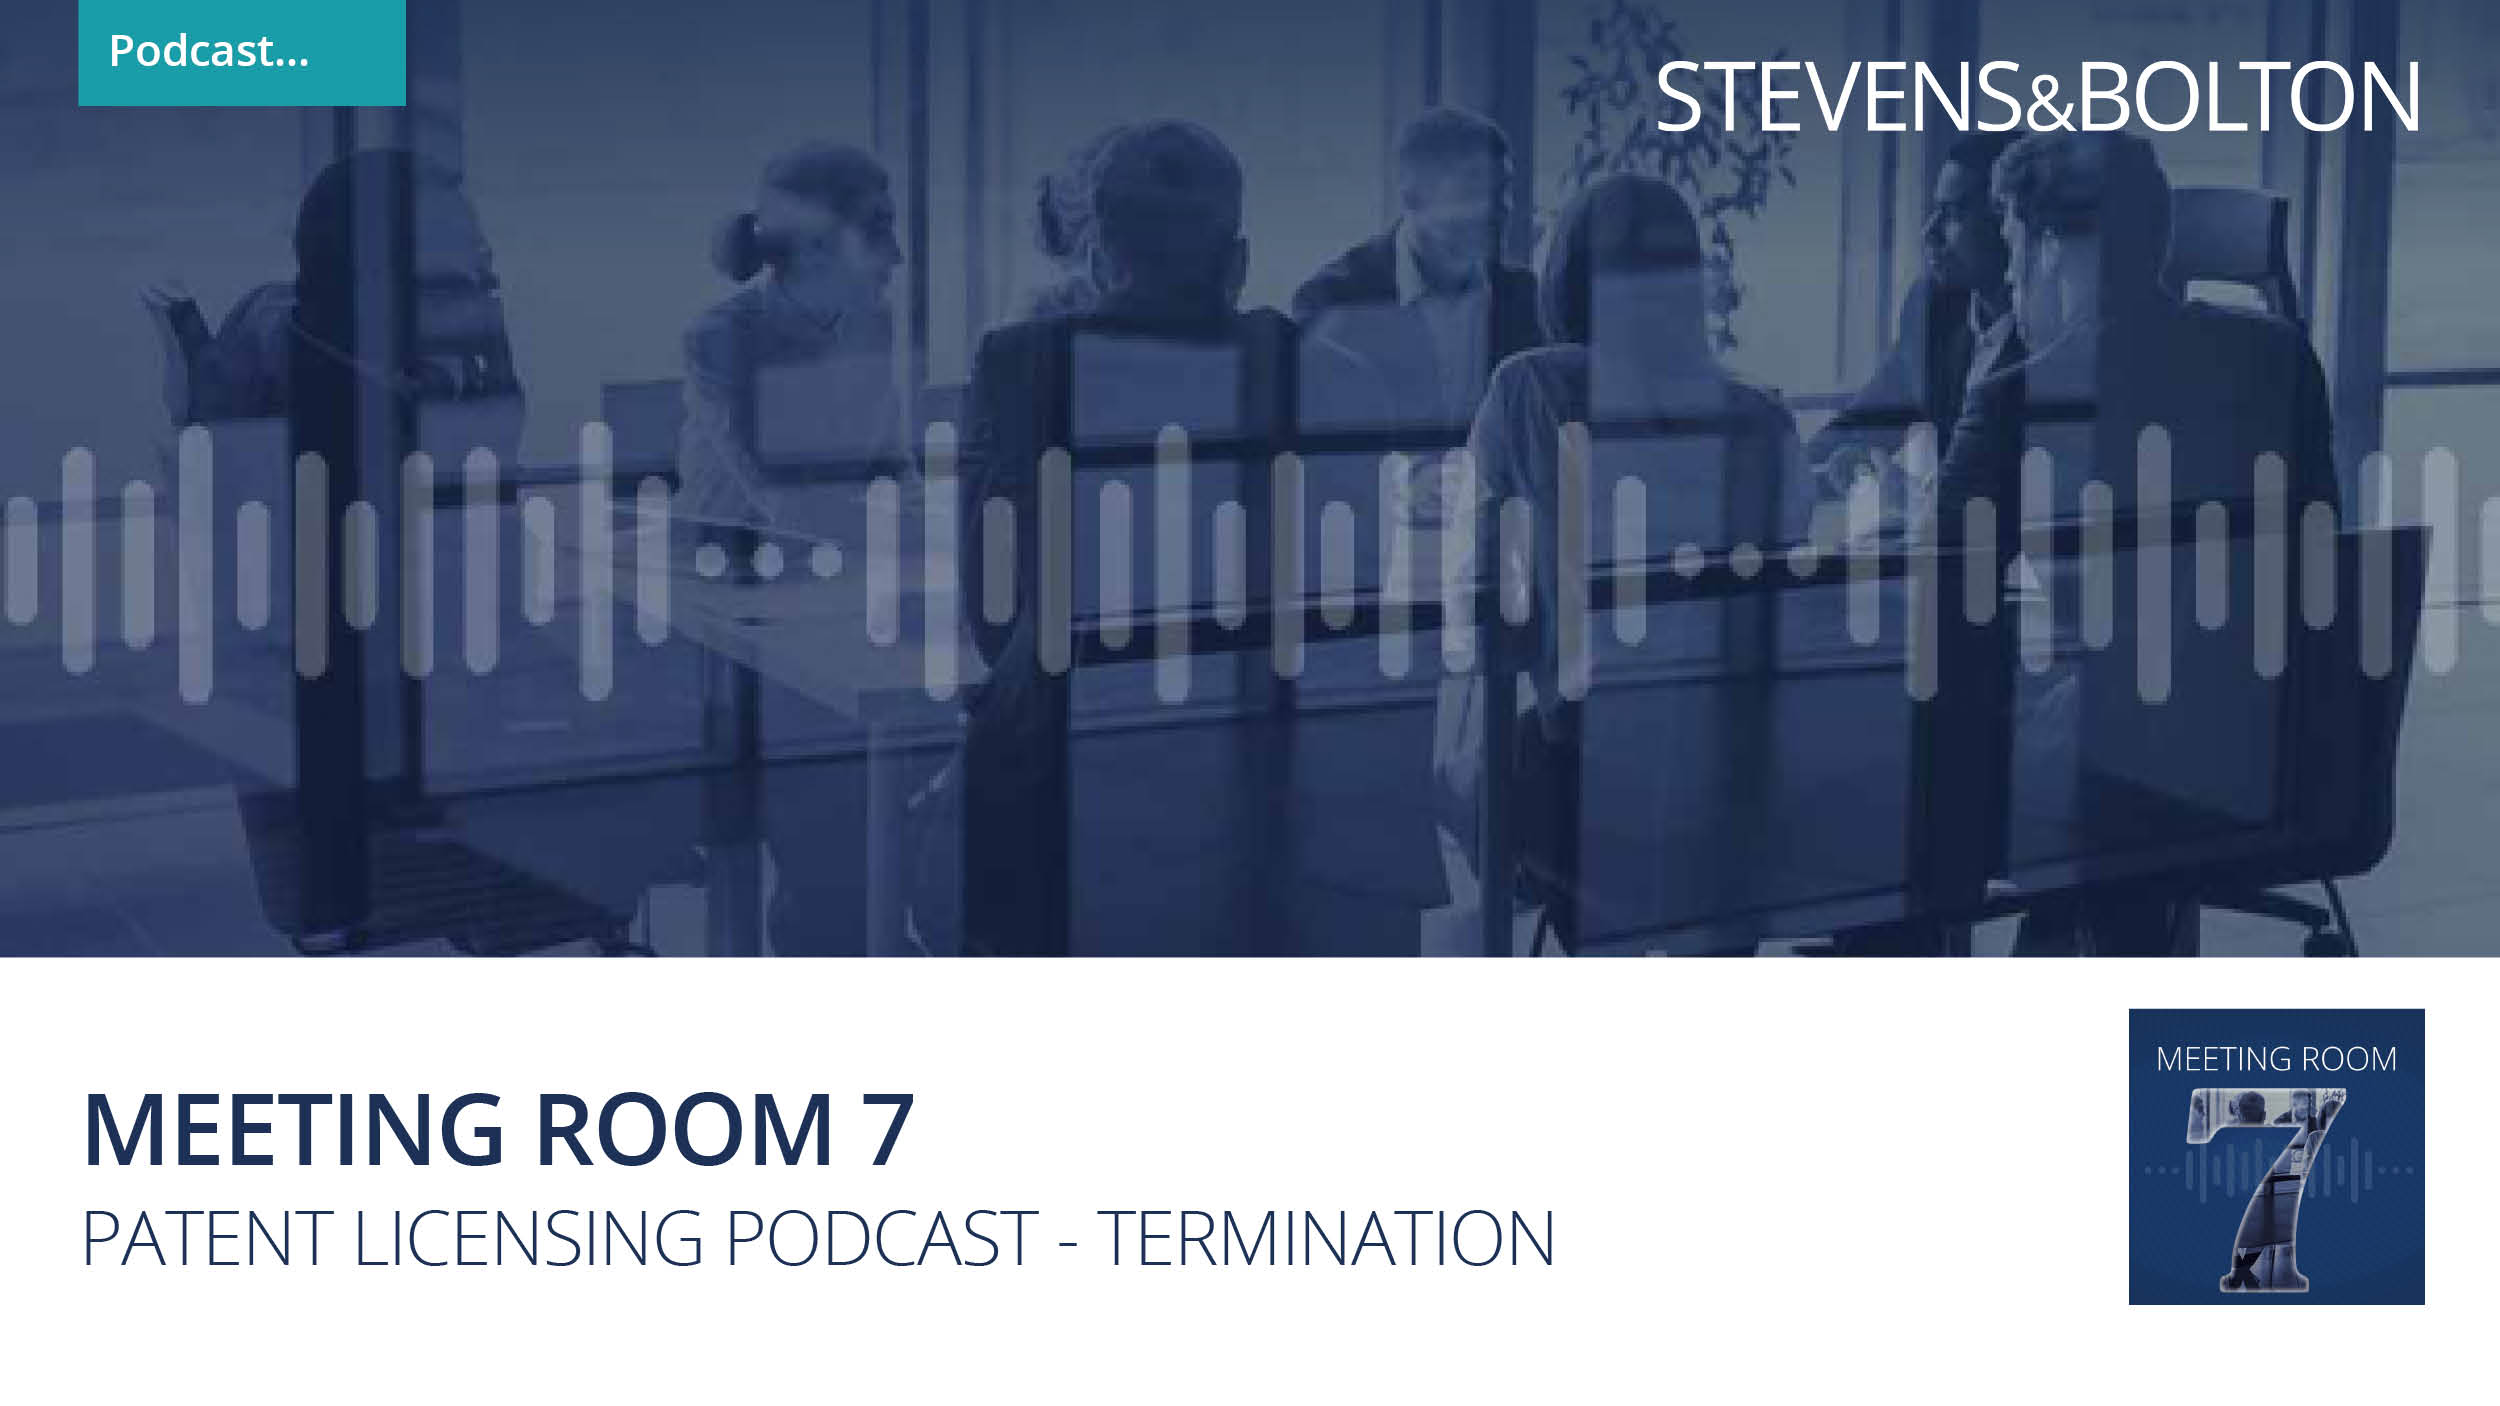 Meeting Room 7 - The patent licensing podcast - Termination